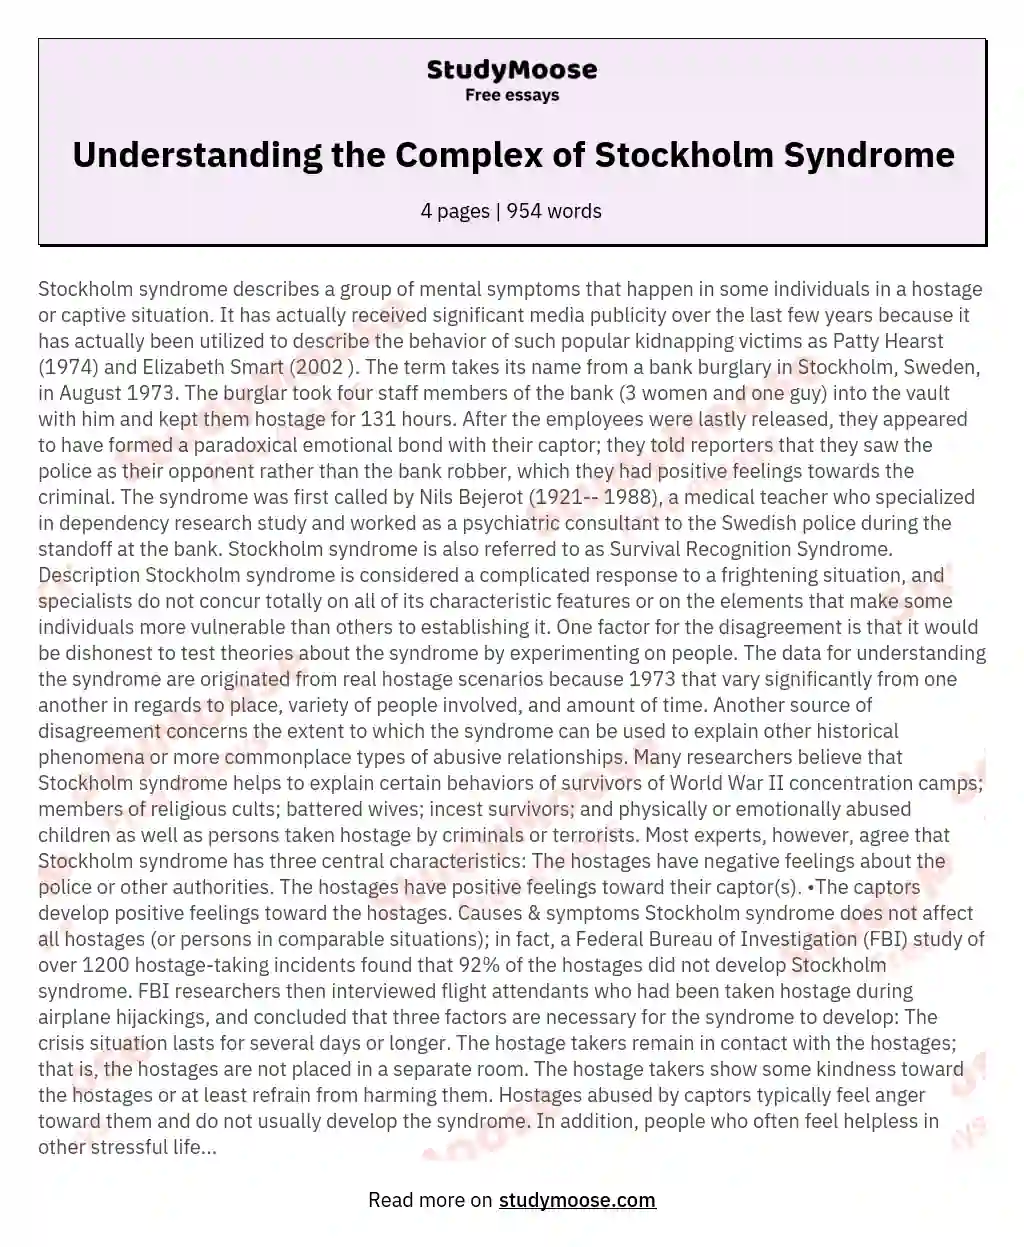 Understanding the Complex of Stockholm Syndrome essay